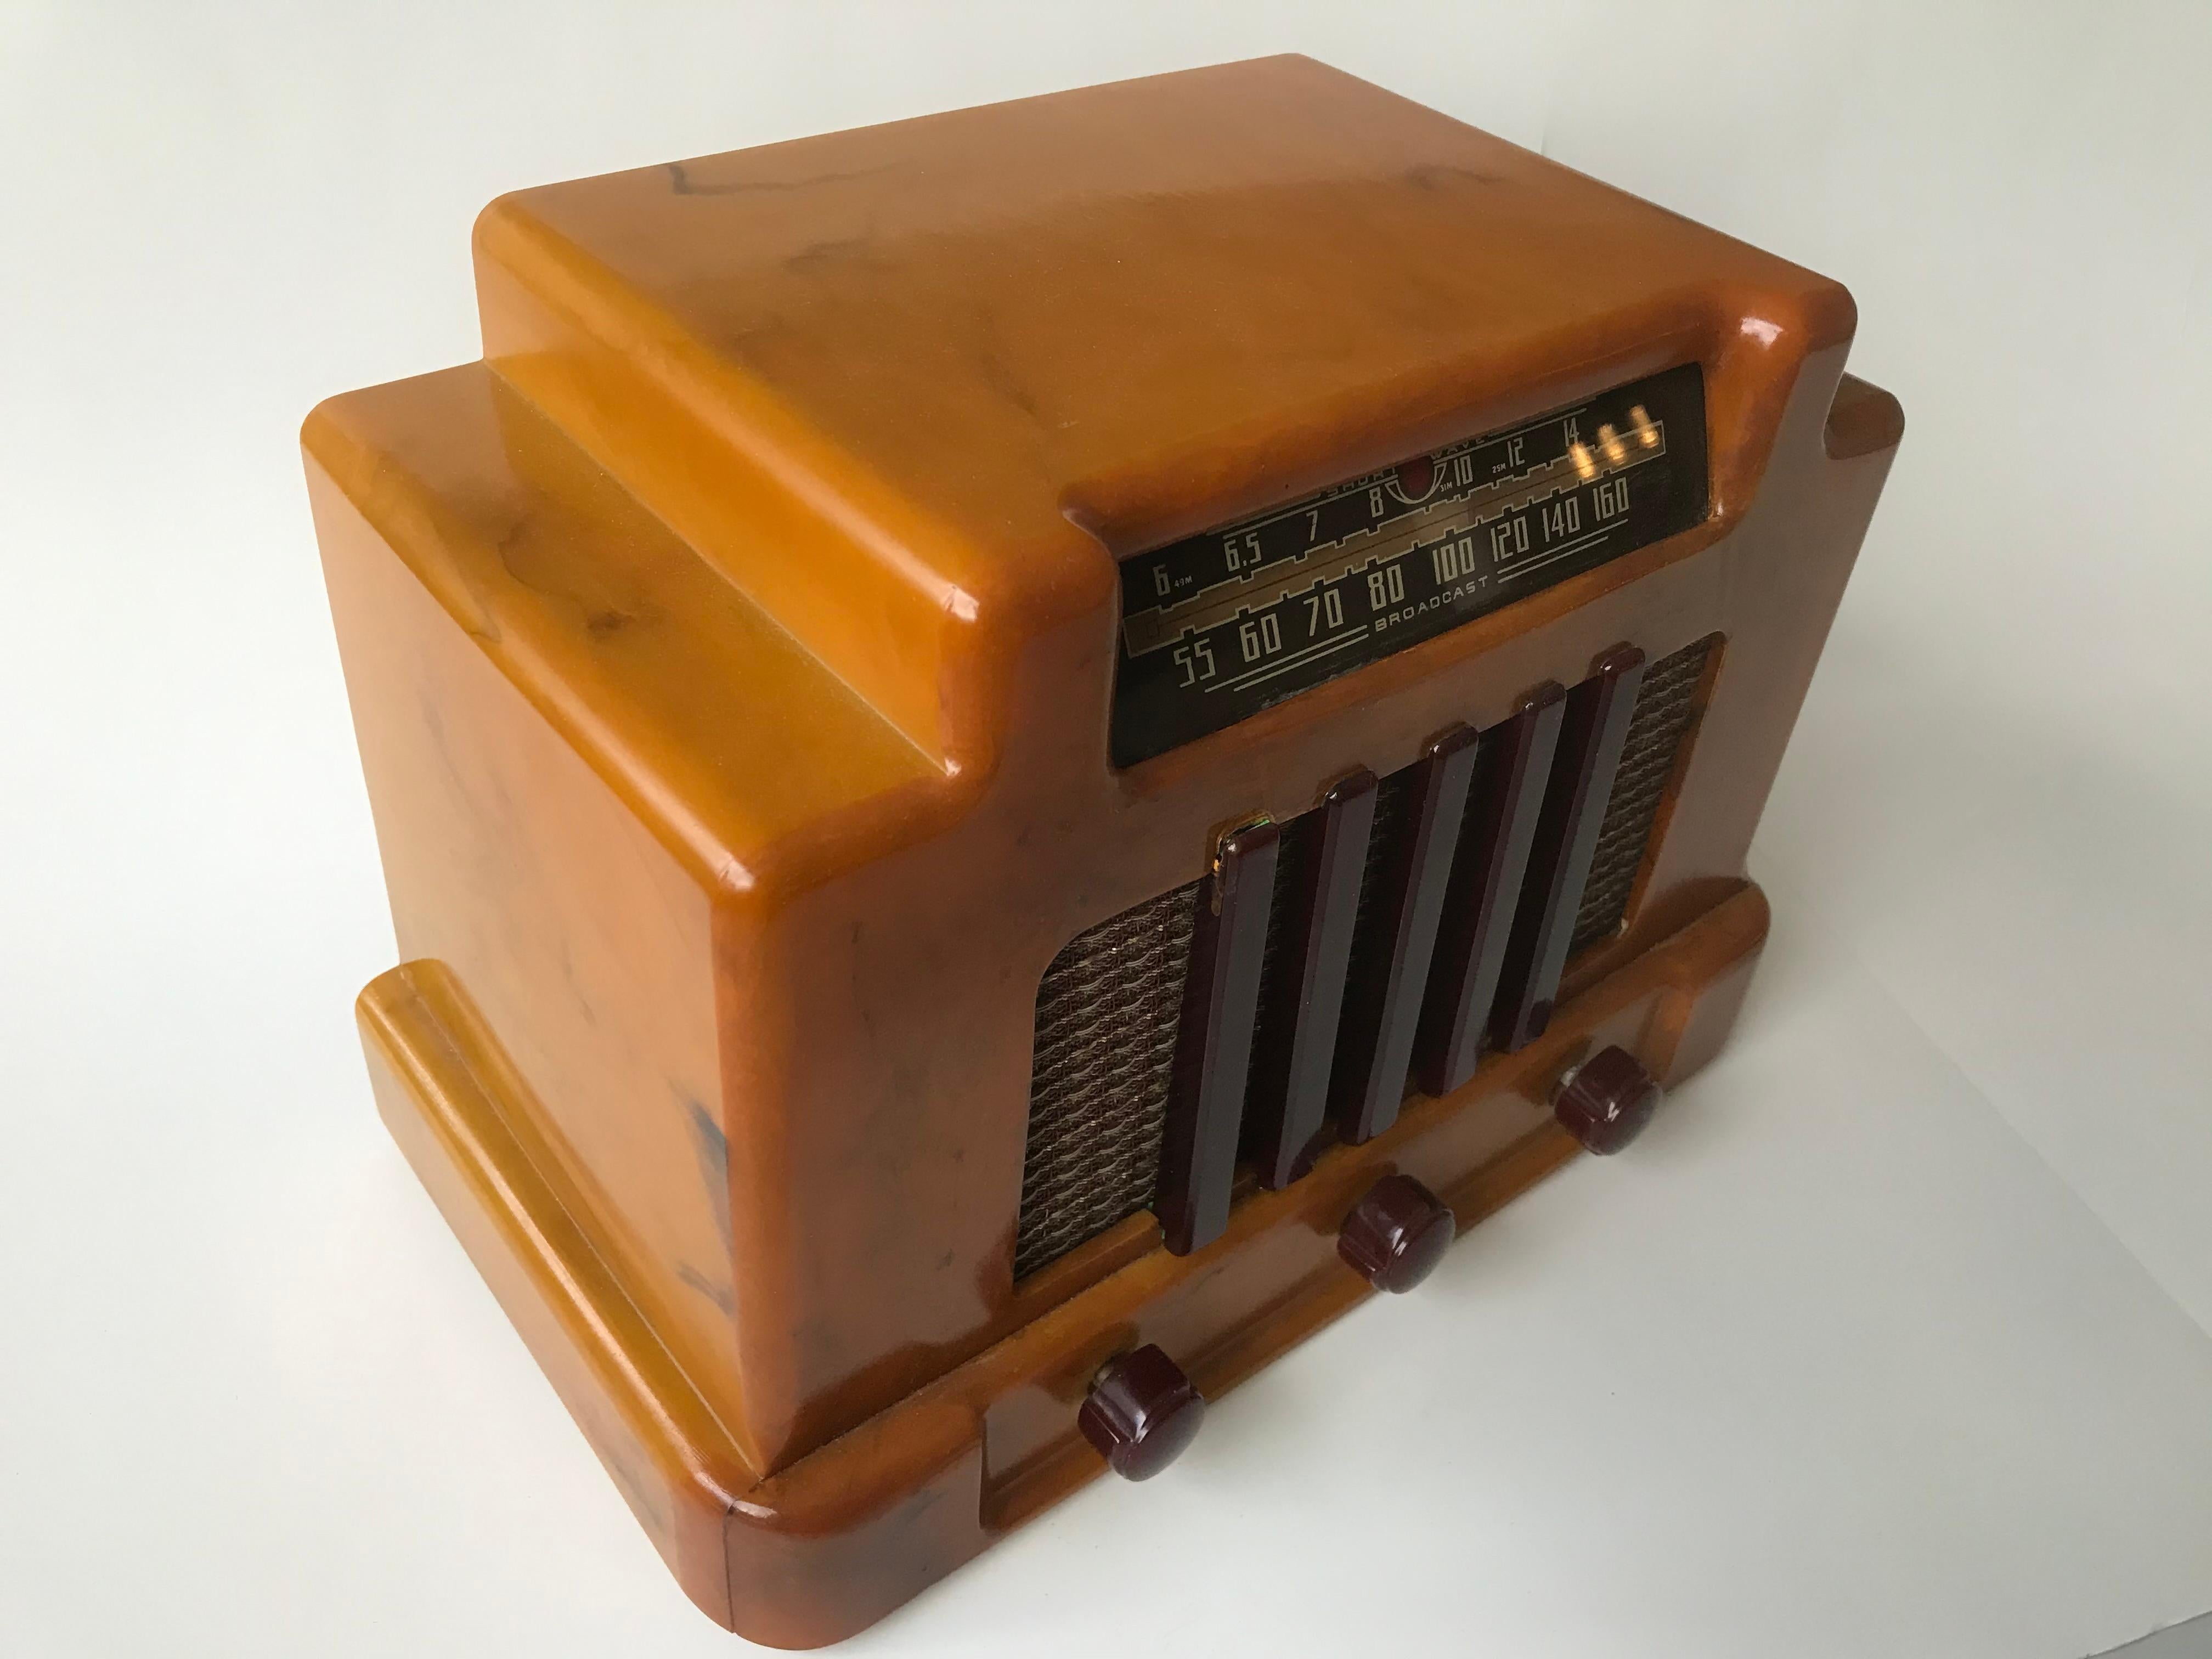 Art Deco Addison Model 5 Butterscotch and Maroon Catalin Tube Radio, 1940 For Sale